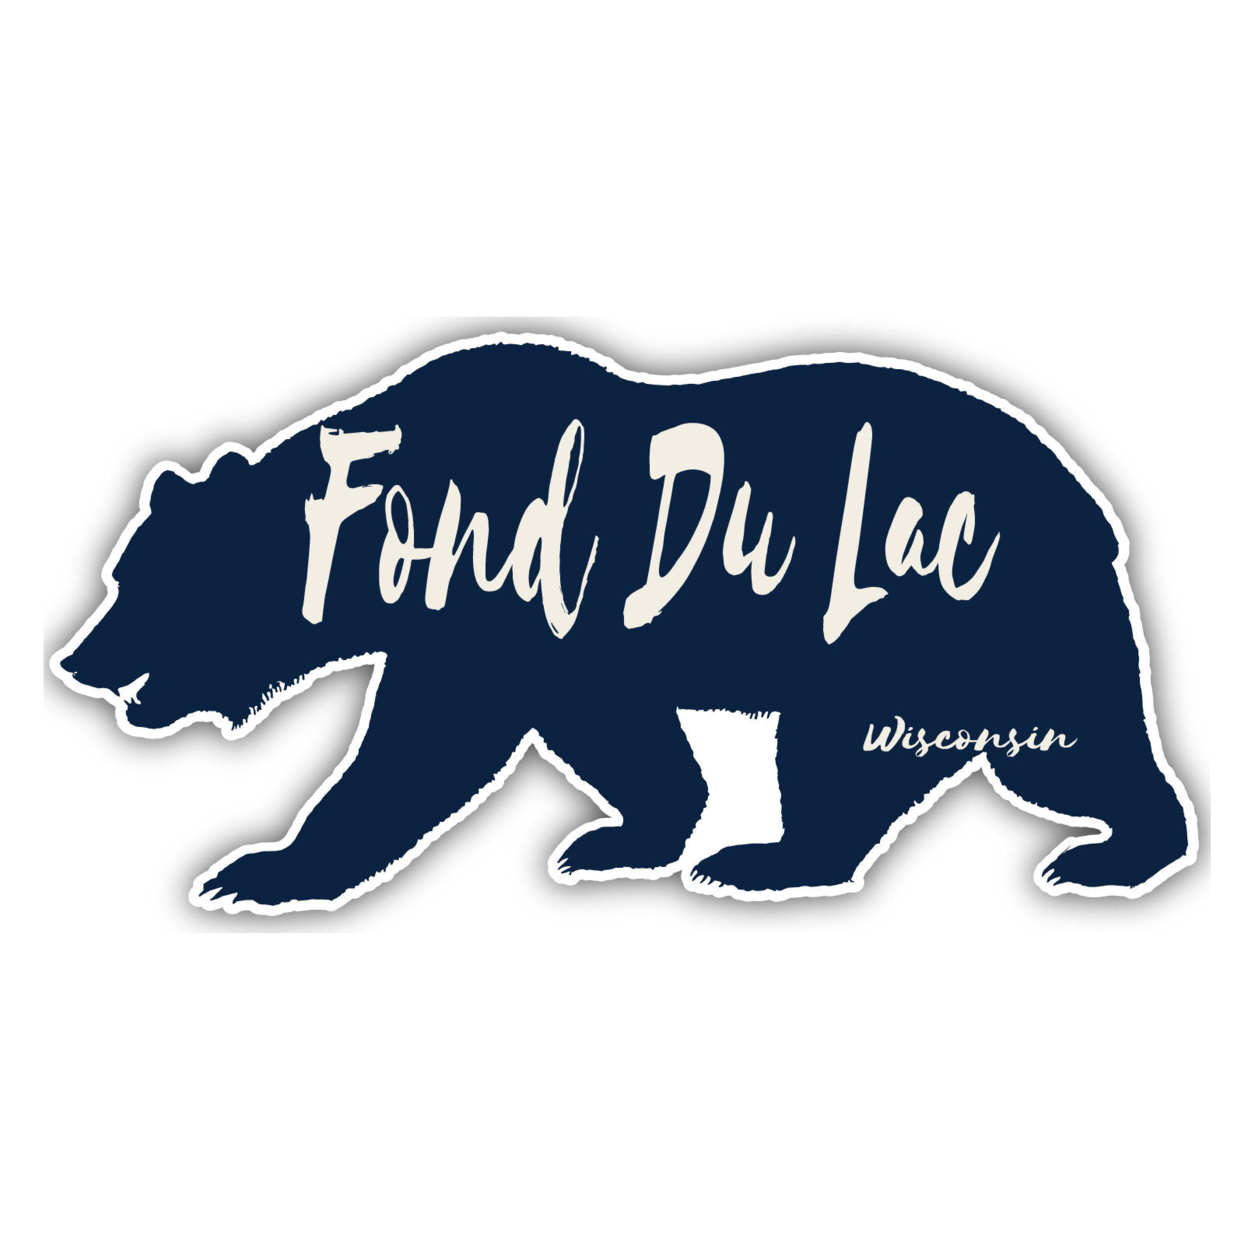 Fond Du Lac Wisconsin Souvenir Decorative Stickers (Choose Theme And Size) - Single Unit, 8-Inch, Great Outdoors